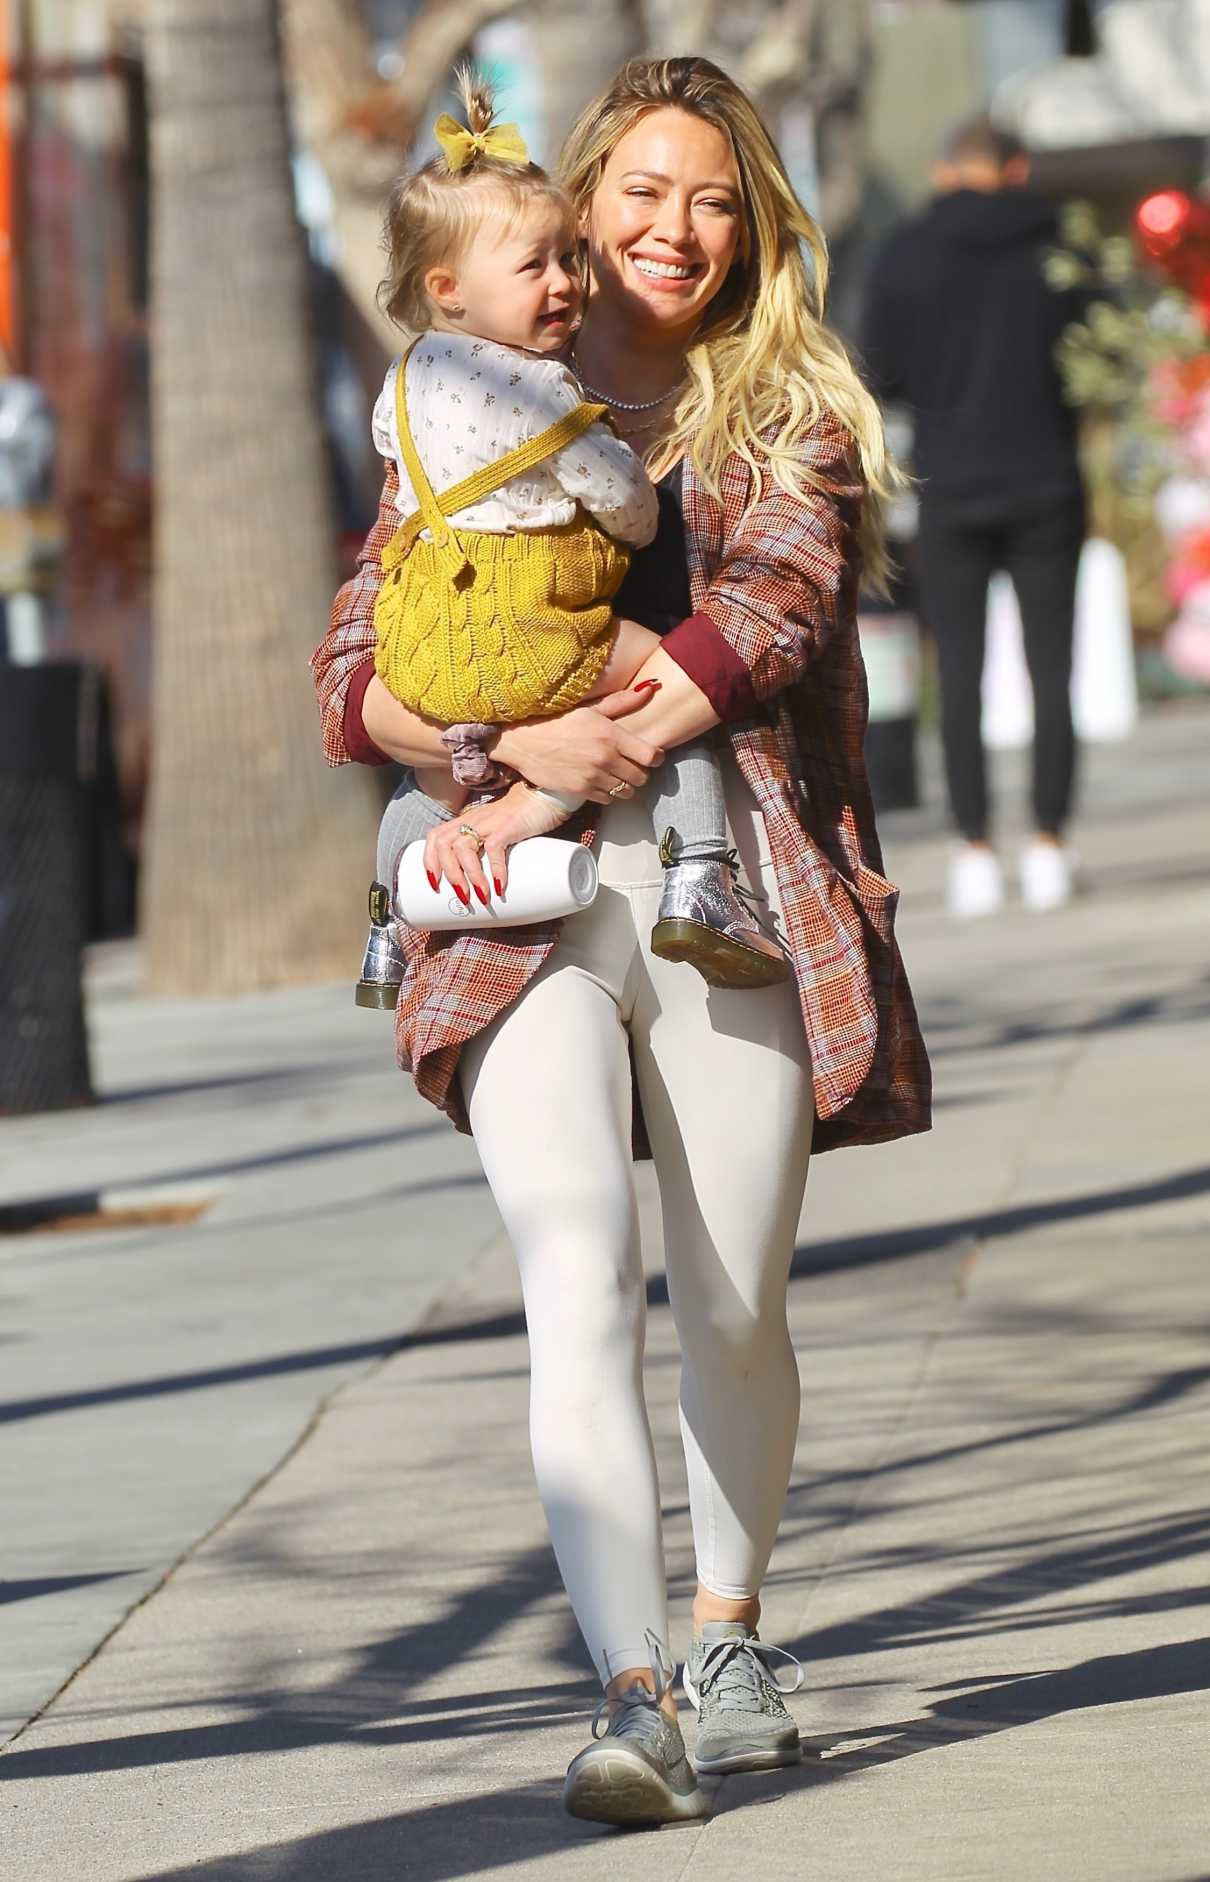 Hilary Duff in a White Leggings Was Seen Out with Her Doughter in ...